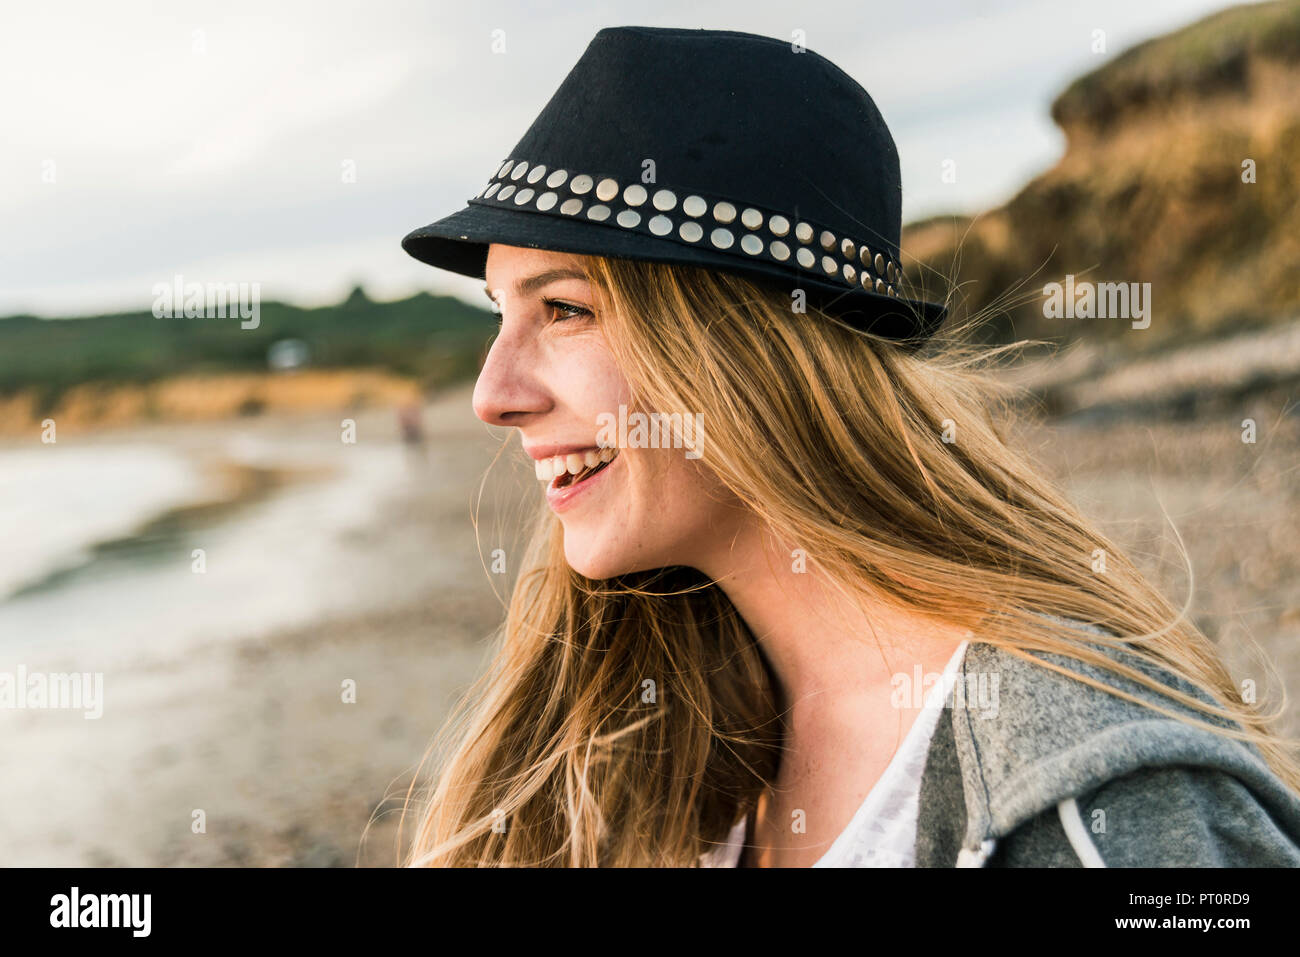 Happy young woman on the beach Banque D'Images